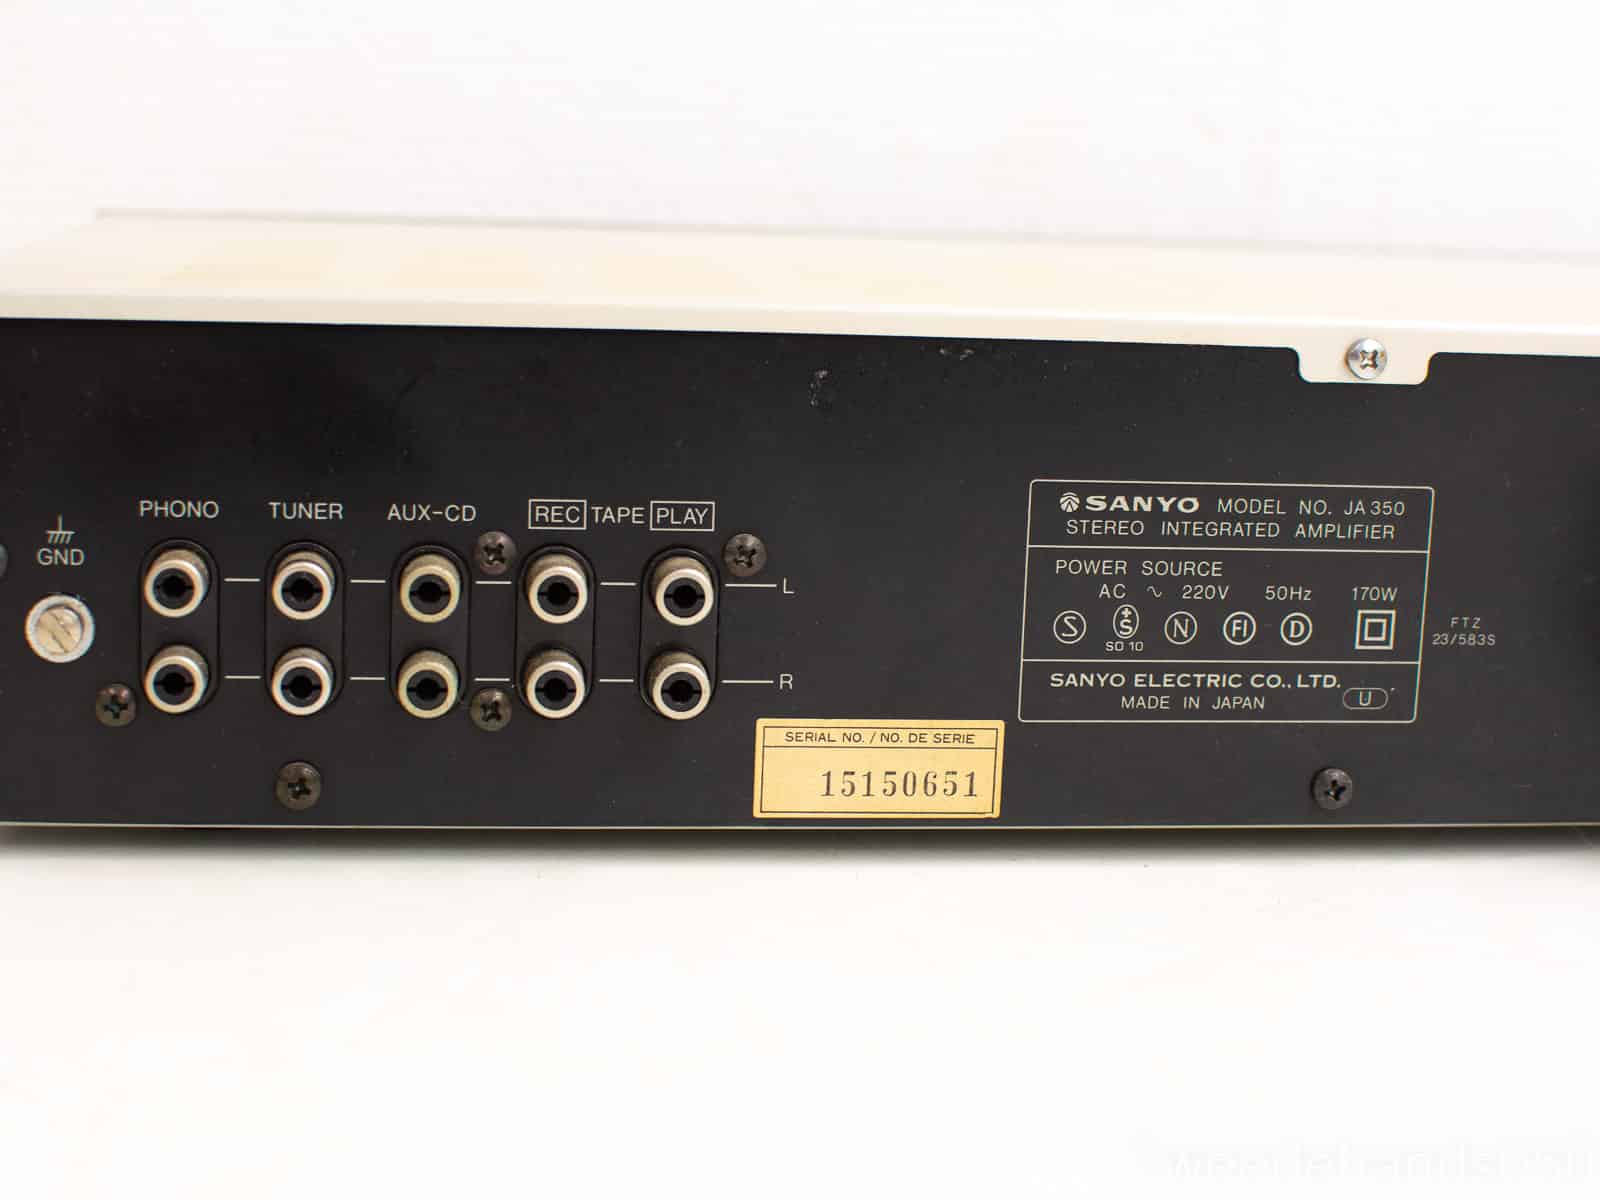 Sanyo stereo integrated amplifier 26026